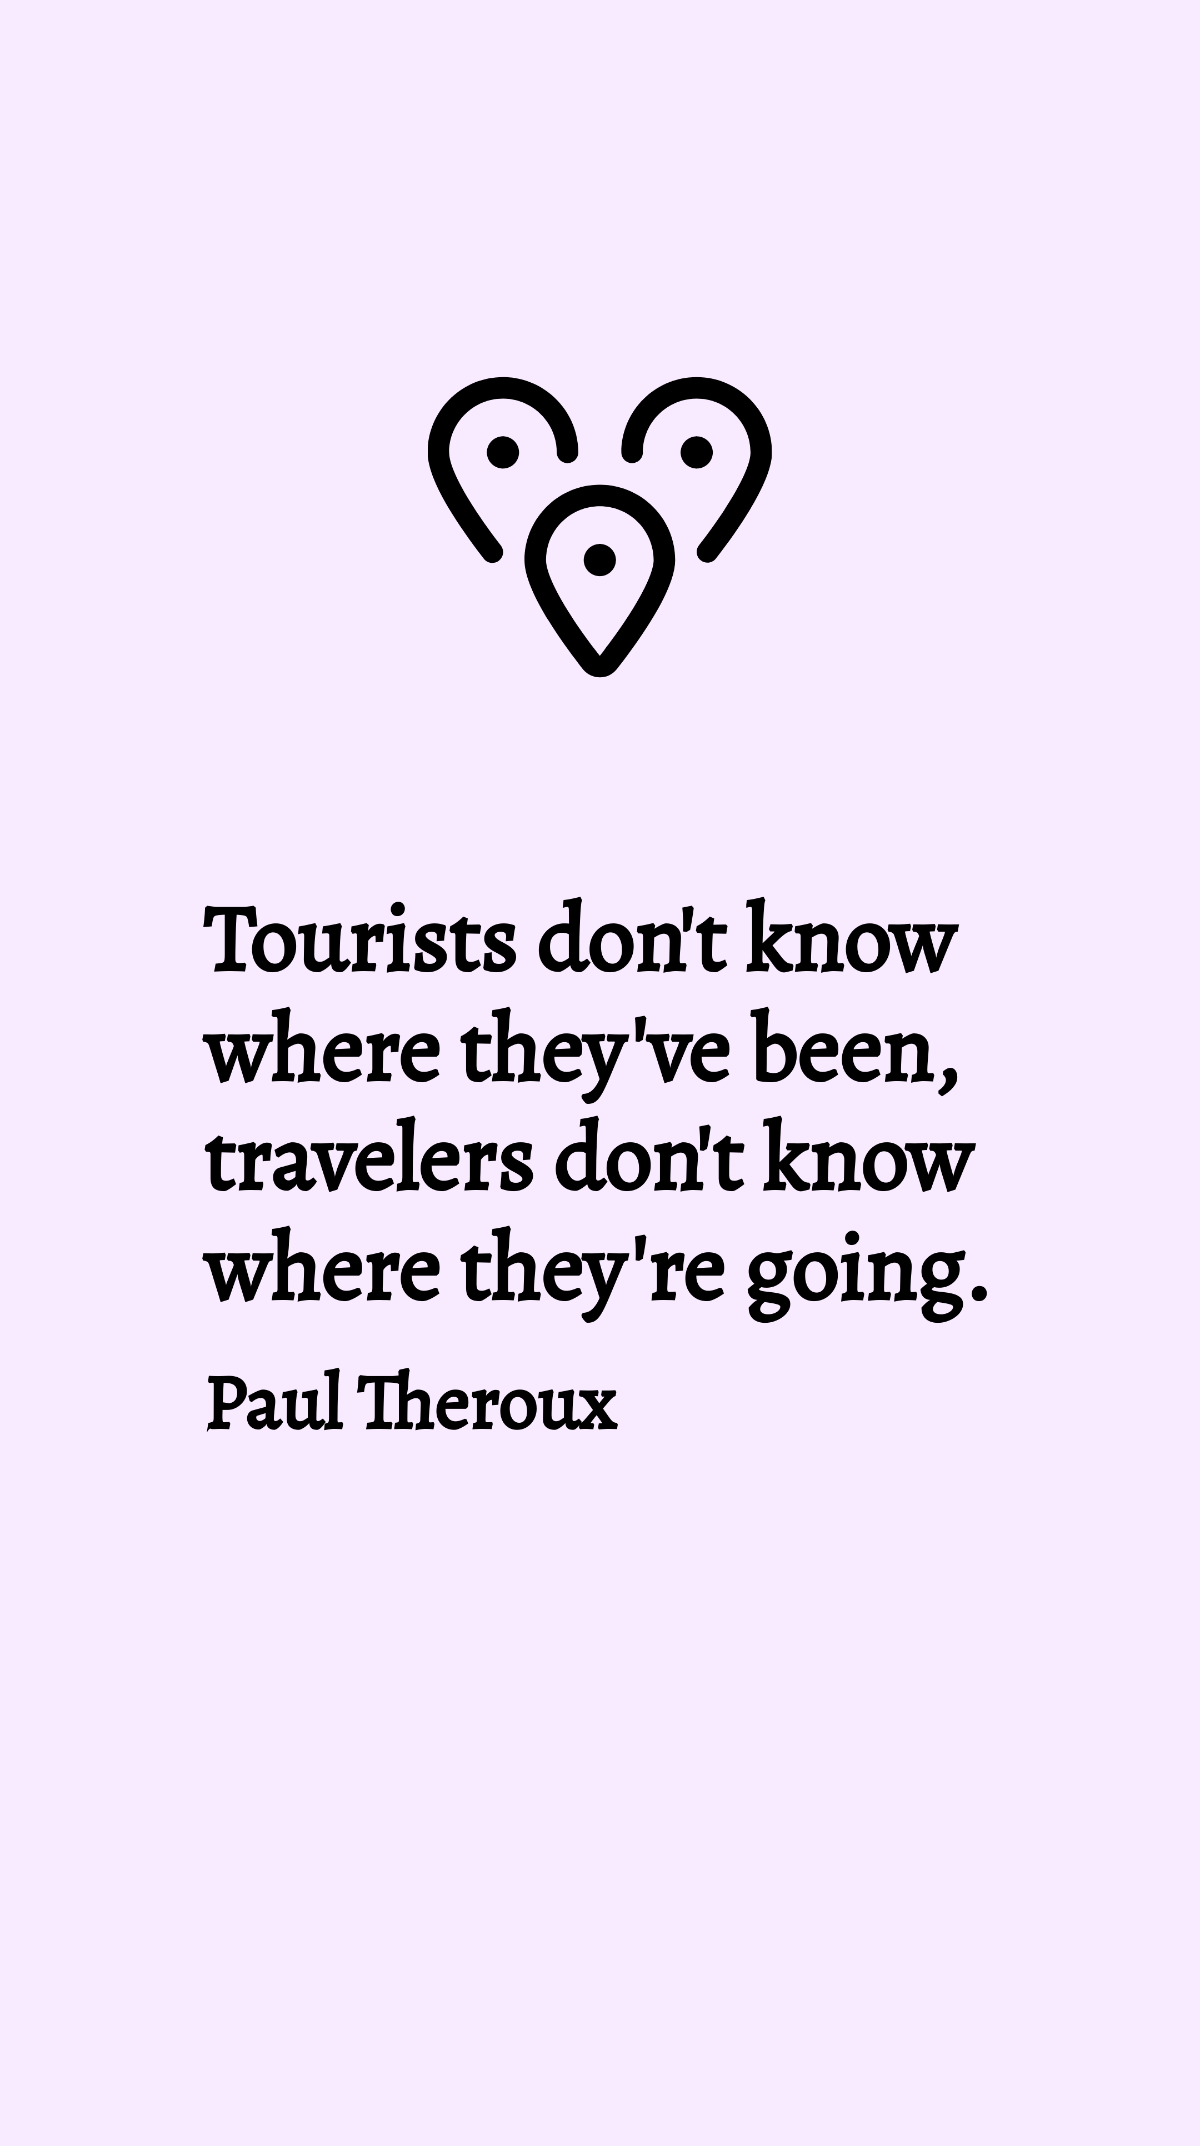 Paul Theroux - Tourists don't know where they've been, travelers don't know where they're going. Template